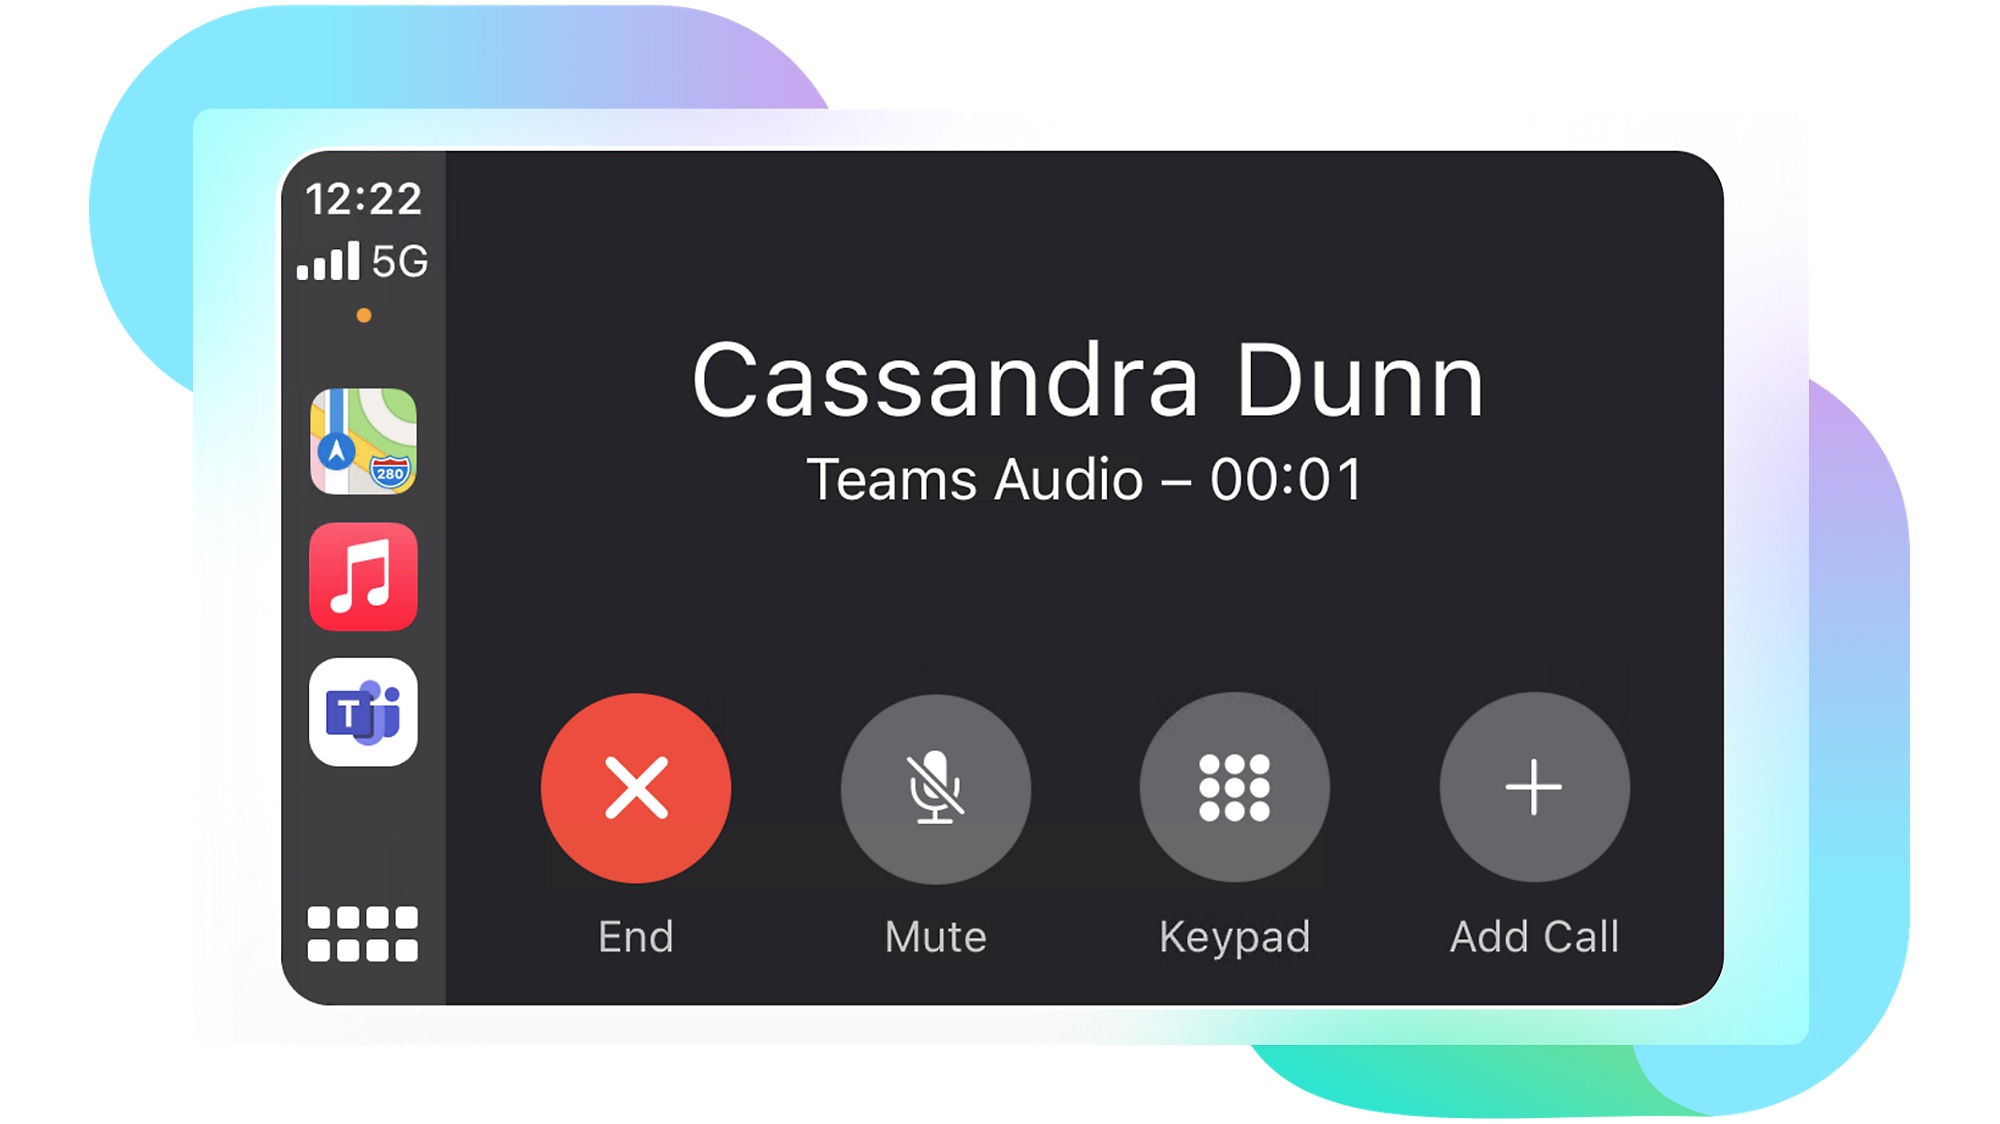 The Apple CarPlay view of a call in progress on Teams